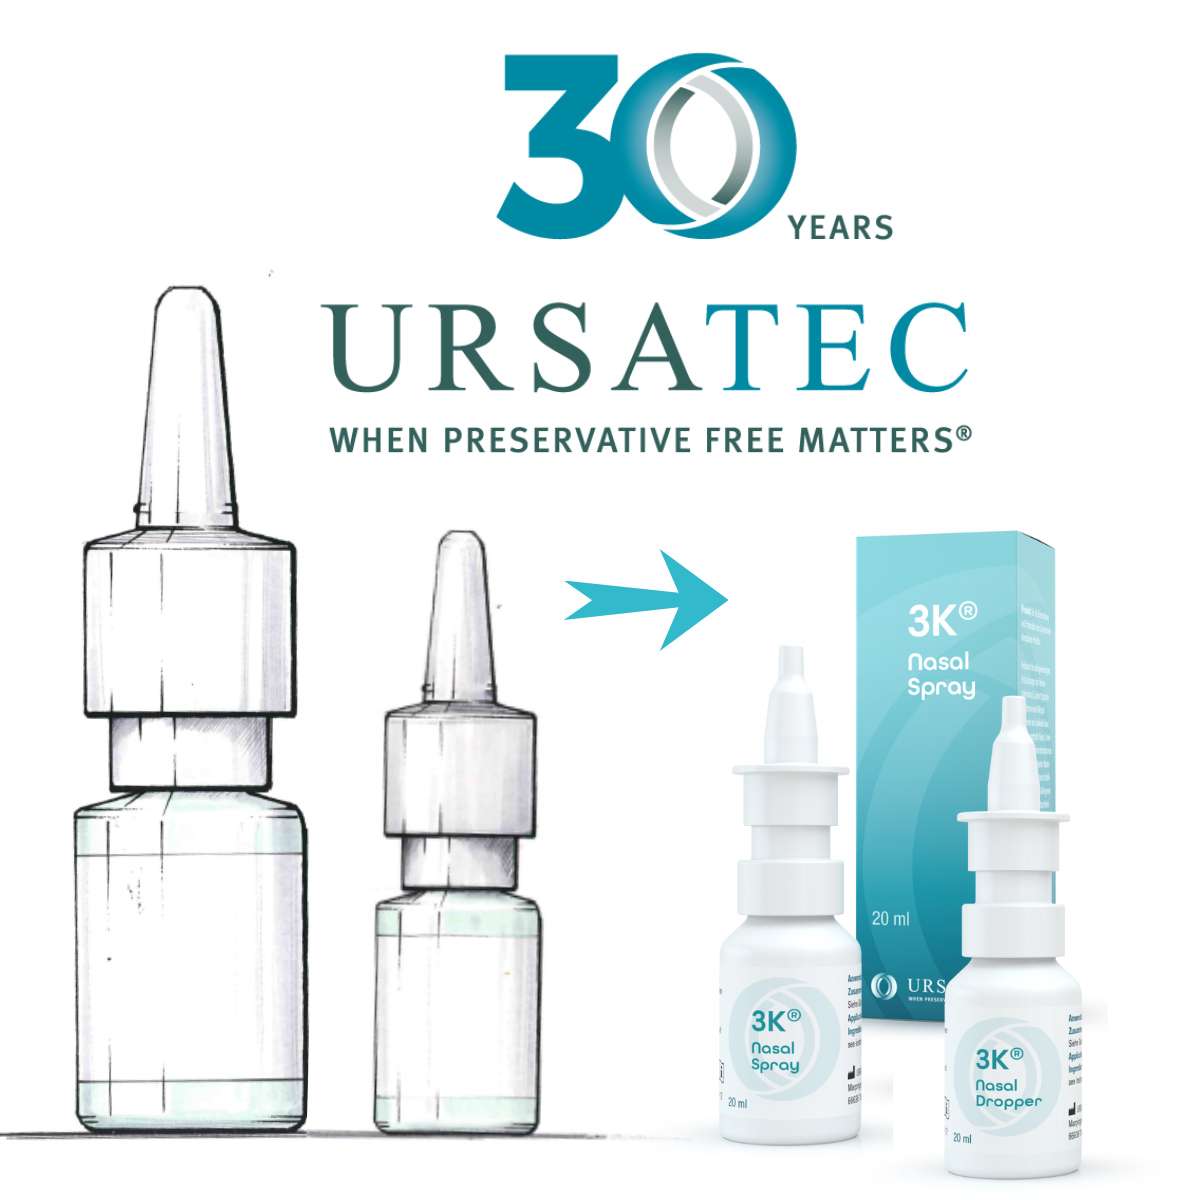 30 years of URSATEC – how the idea started